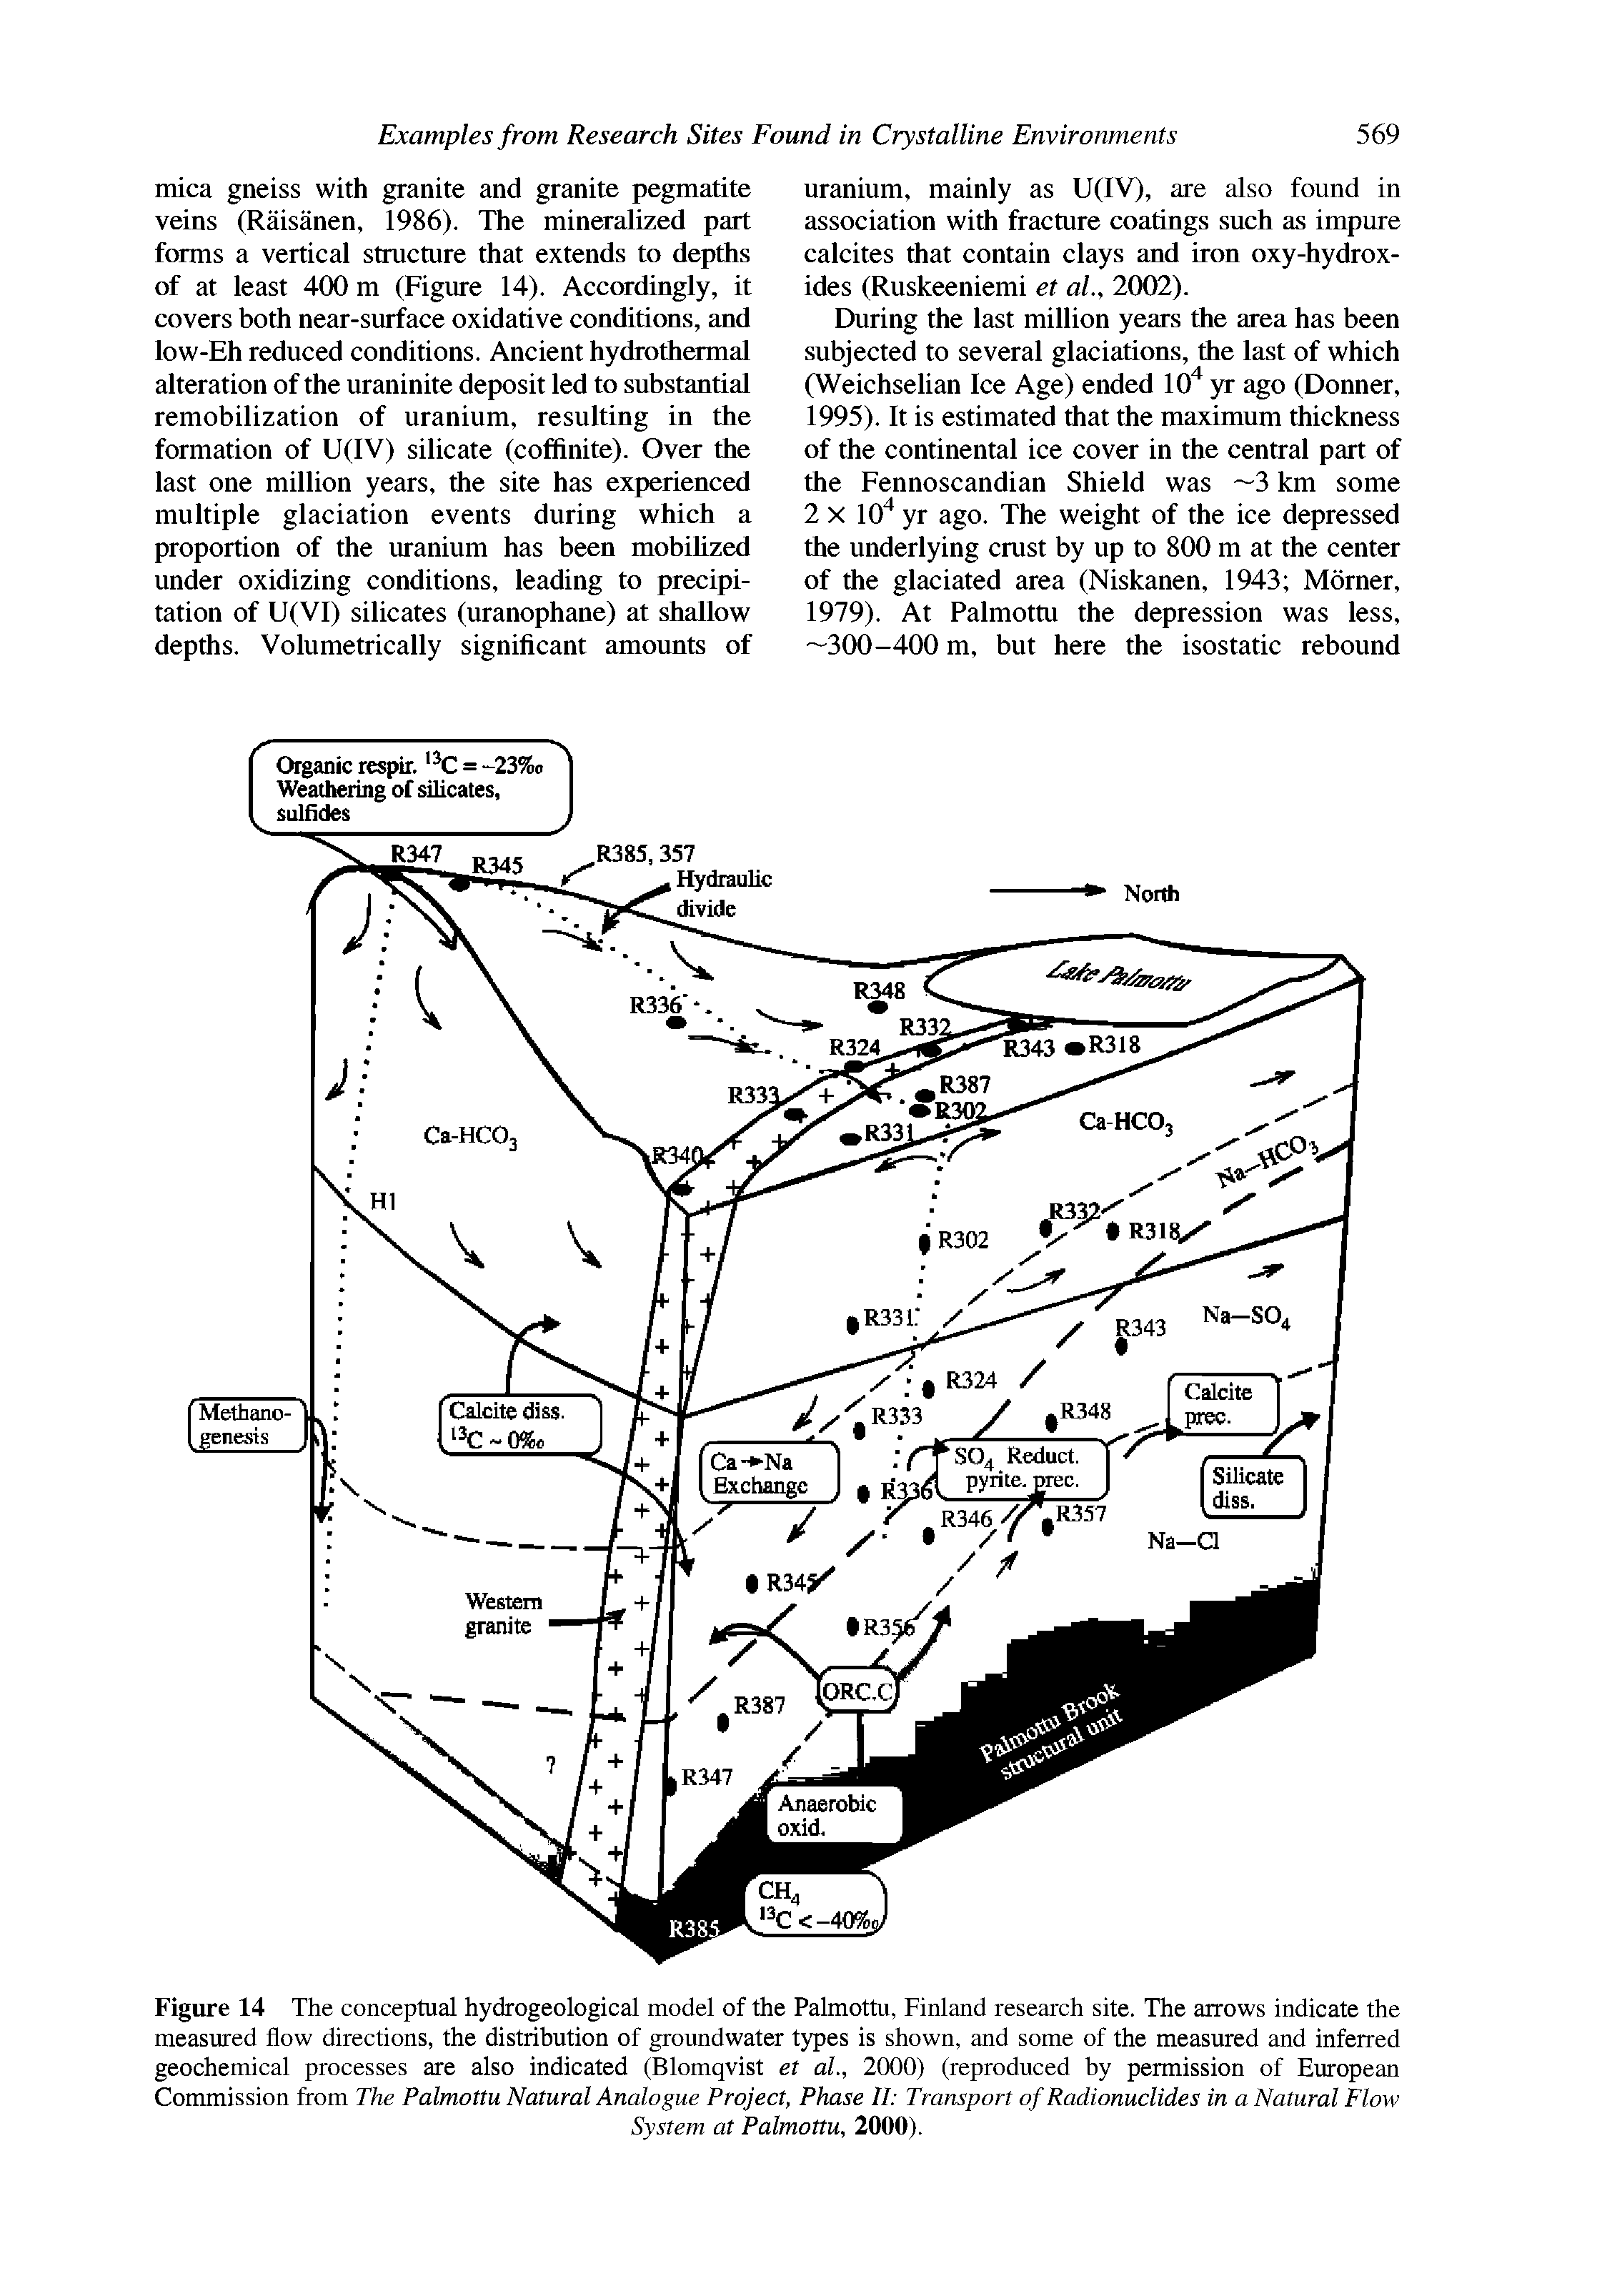 Figure 14 The conceptual hydrogeological model of the Palmottu, Finland research site. The arrows indicate the measured flow directions, the distribution of groundwater types is shown, and some of the measured and inferred geochemical processes are also indicated (Blomqvist et al., 2000) (reproduced by permission of European Commission from The Palmottu Natural Analogue Project, Phase II Transport of Radionuclides in a Natural Flow...